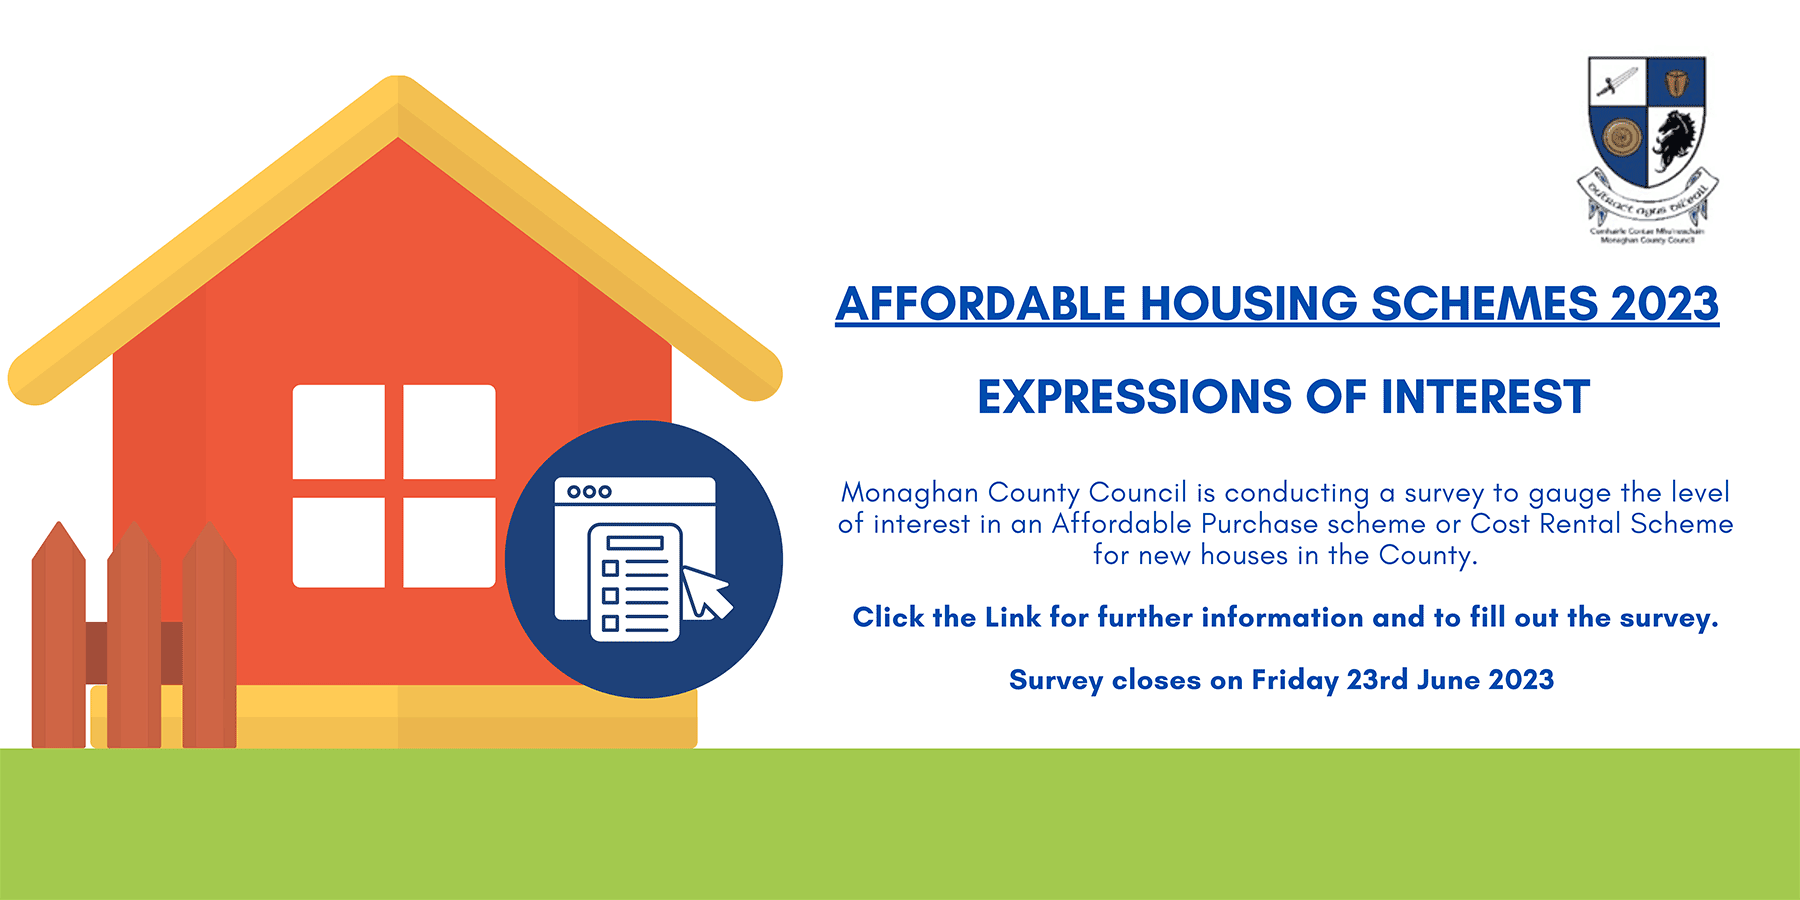 Affordable Housing